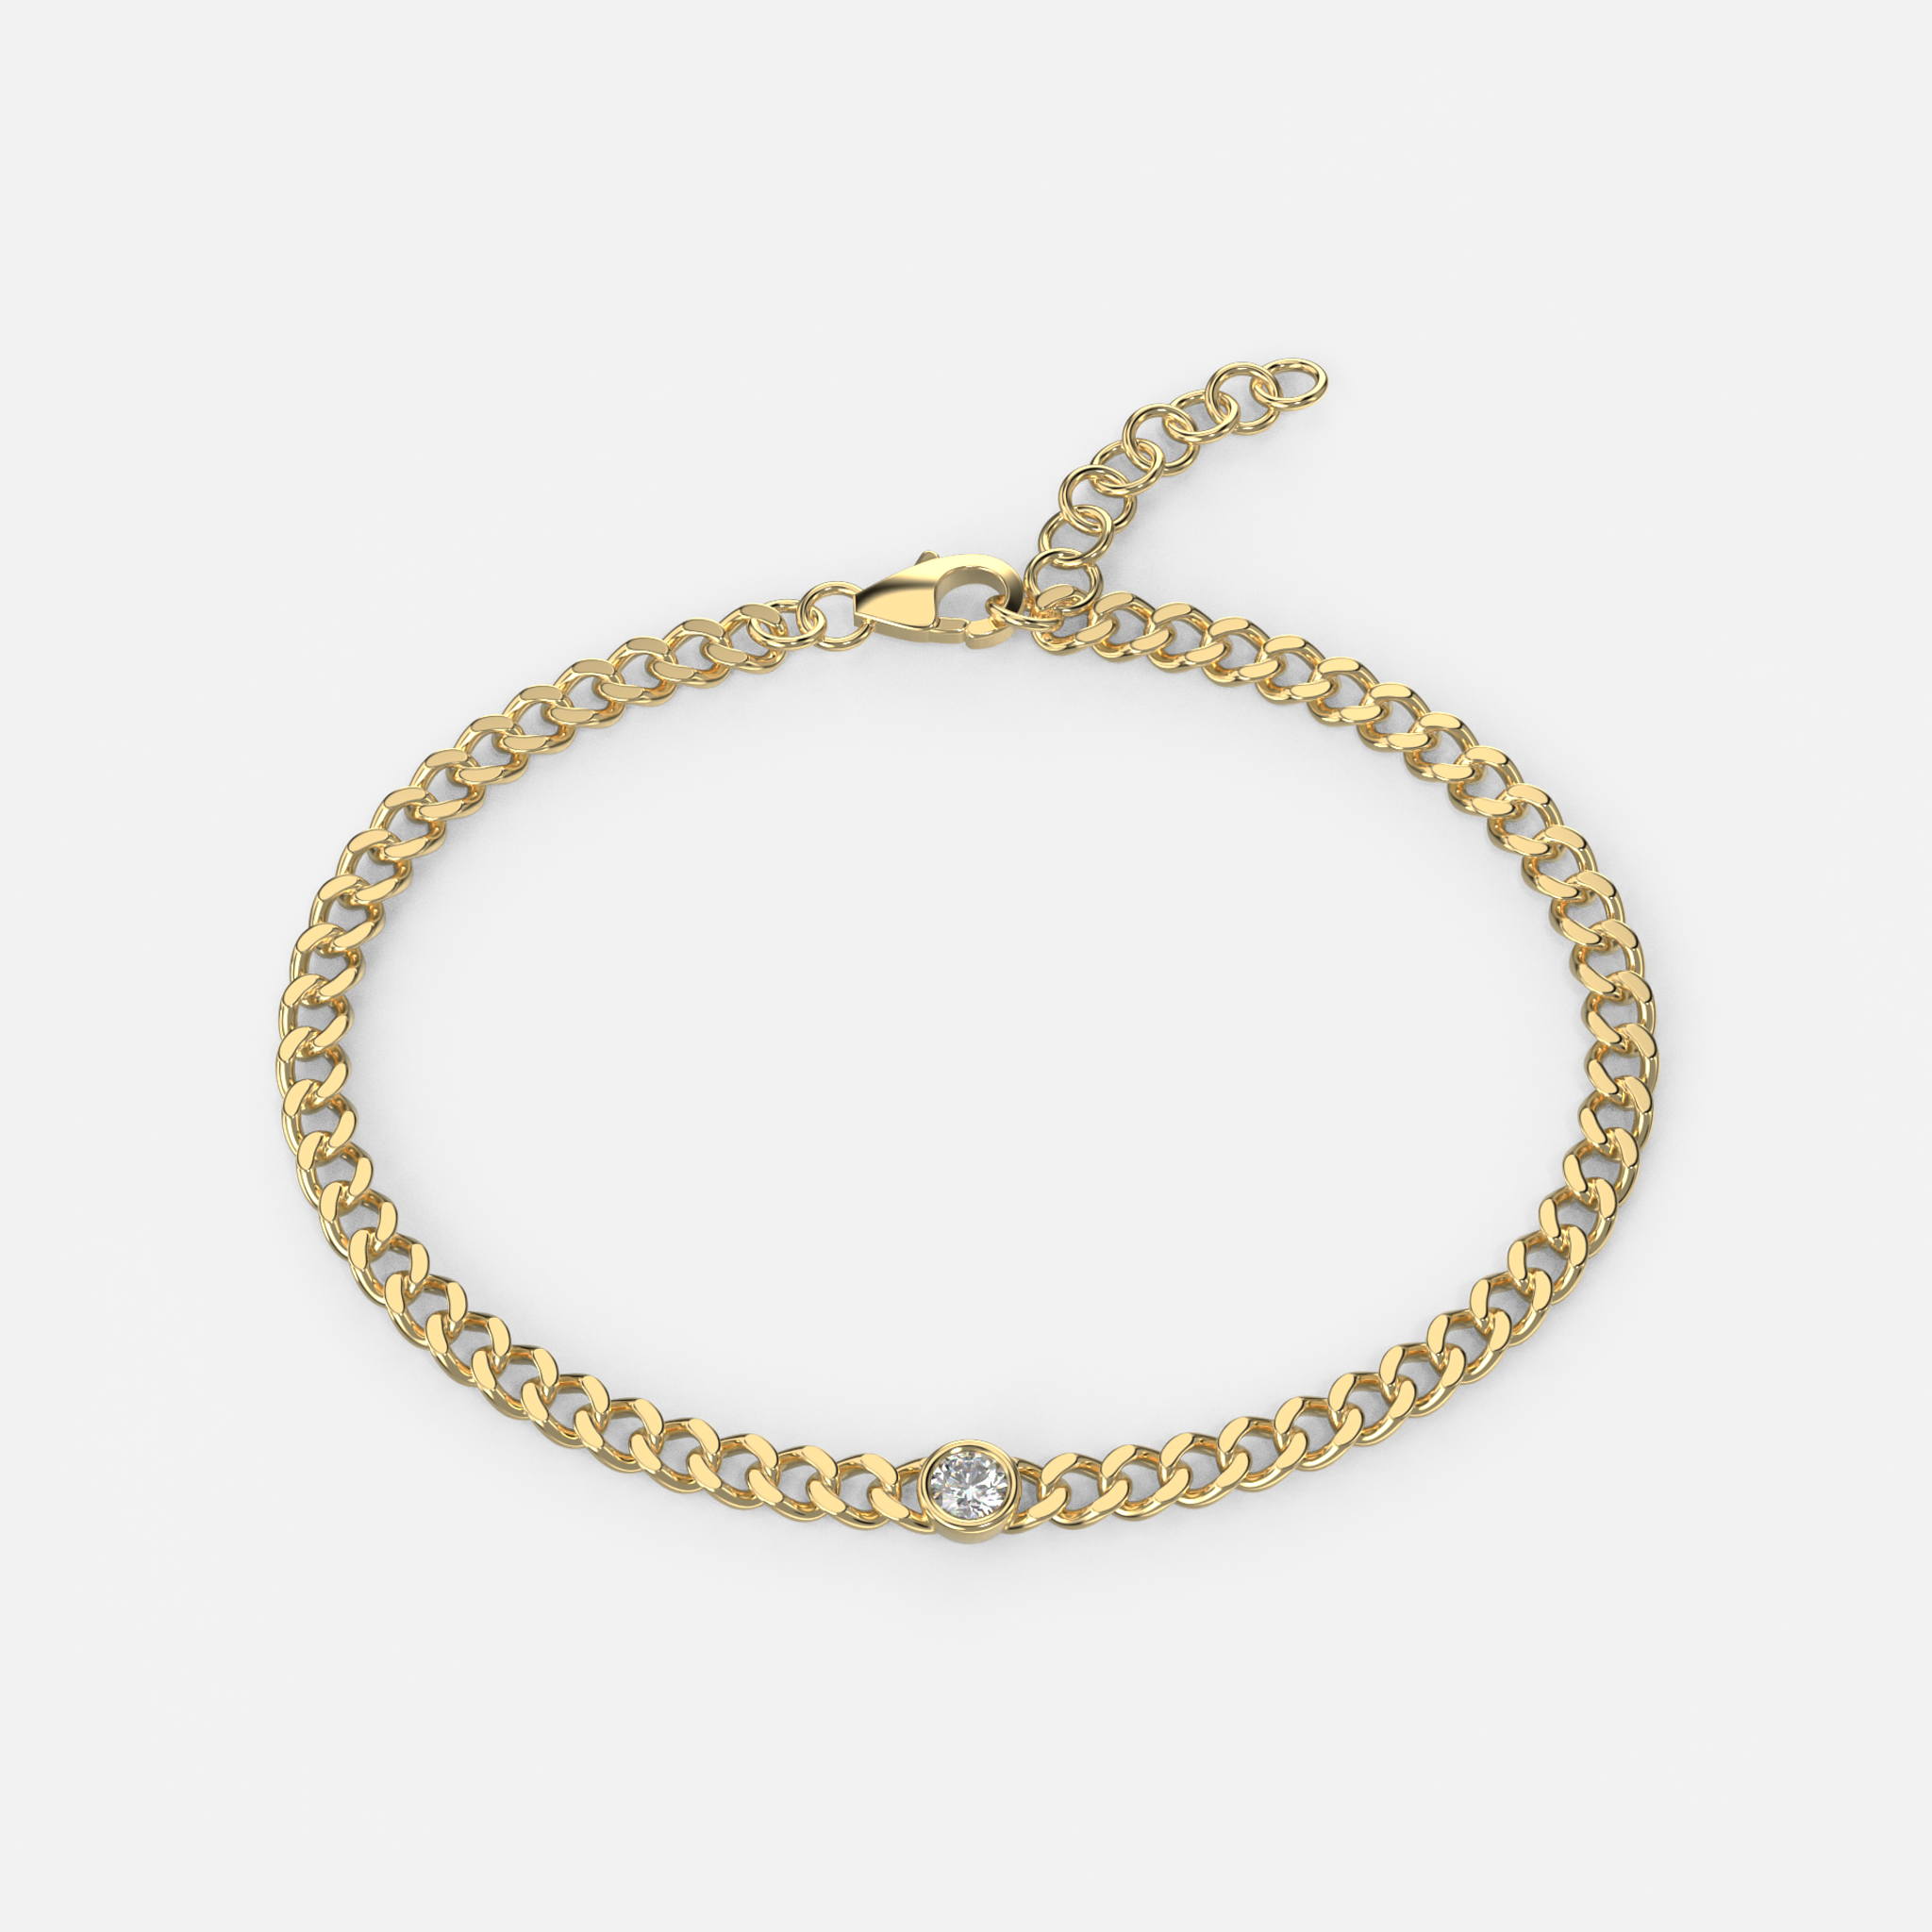 Chunky yet lightweight solid 14k gold Cuban link bracelet with an adjustable design, accented by a dainty bezel set diamond